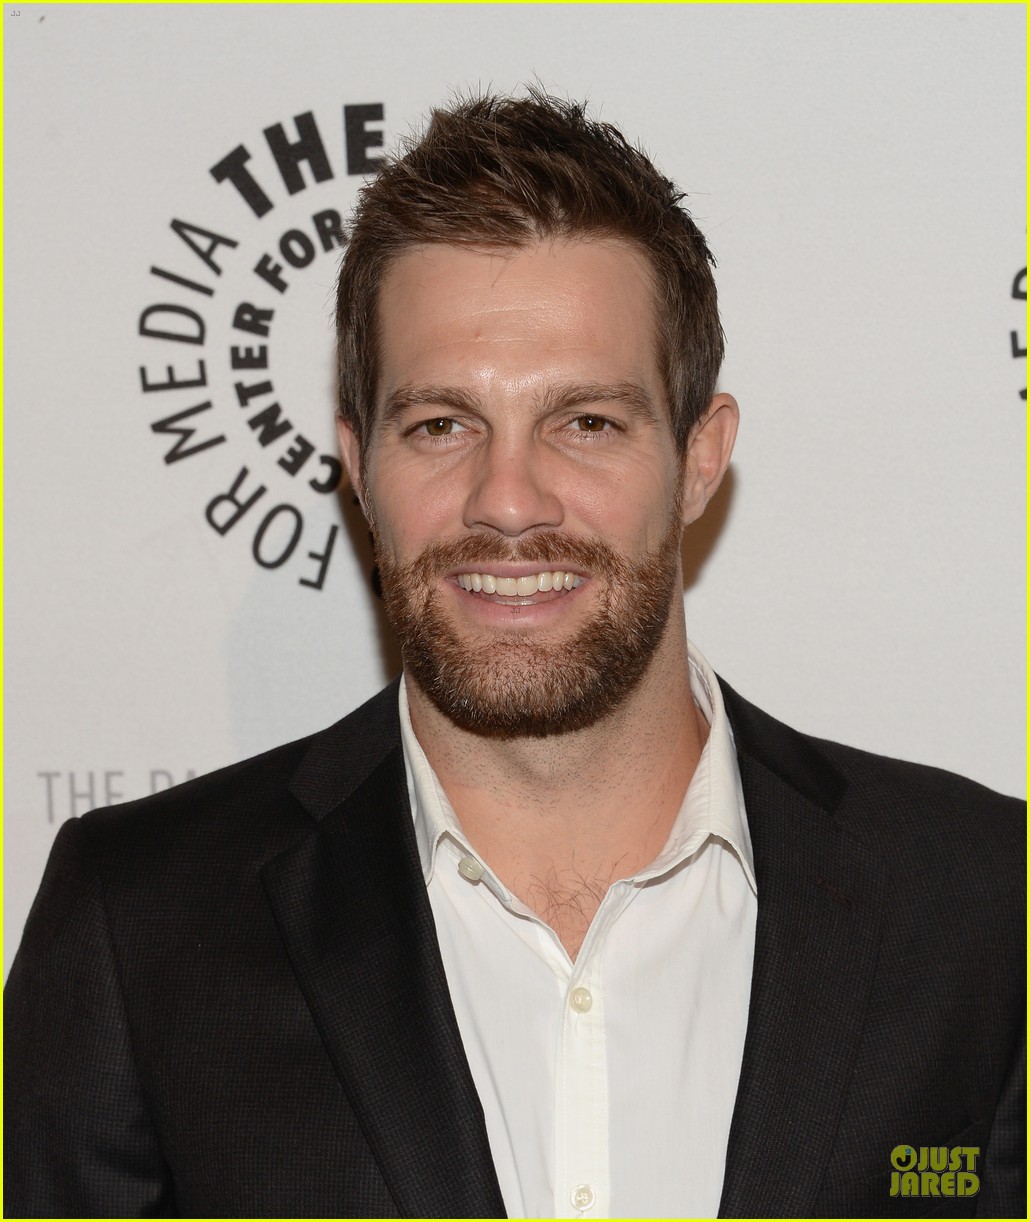 geoff-stults-images